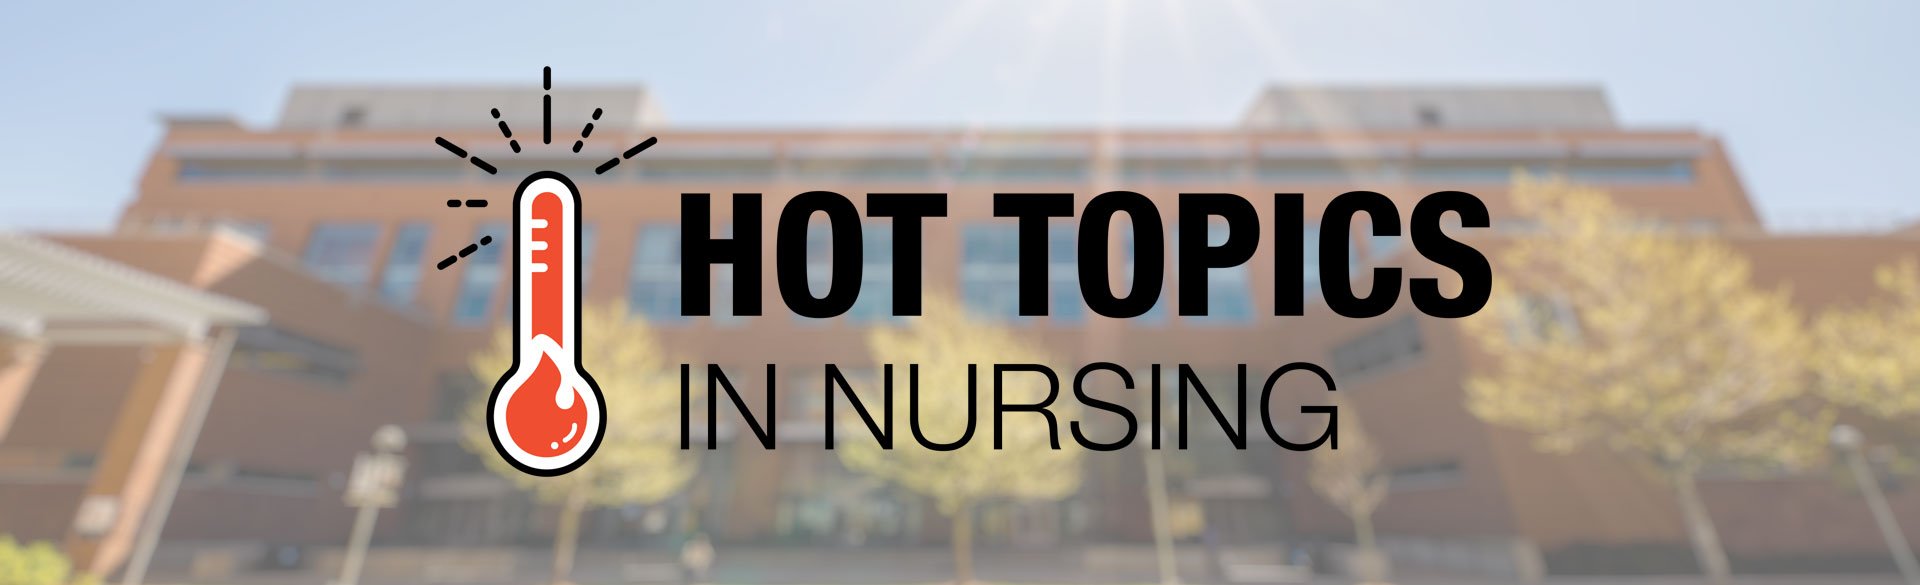 Hot Topics in Nursing: Accredited nursing programs open doors to quality education, state licensing and good jobs